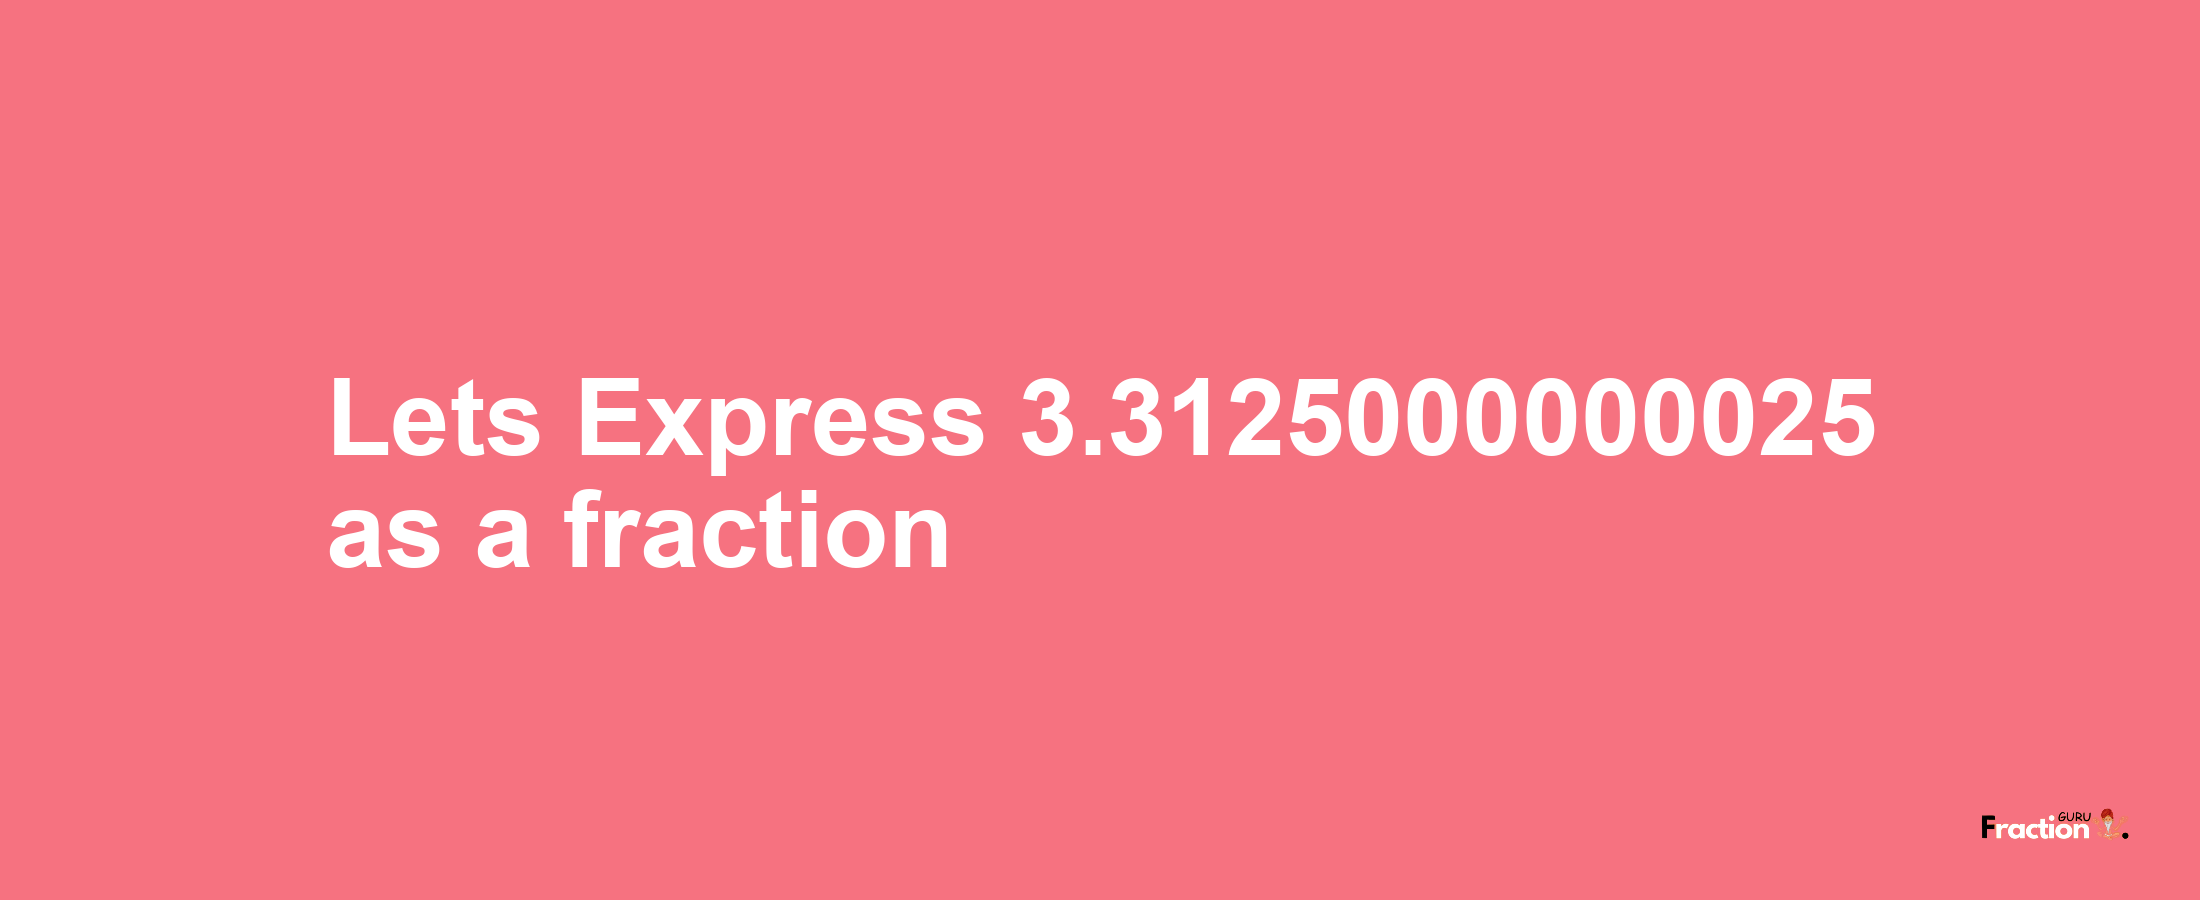 Lets Express 3.3125000000025 as afraction